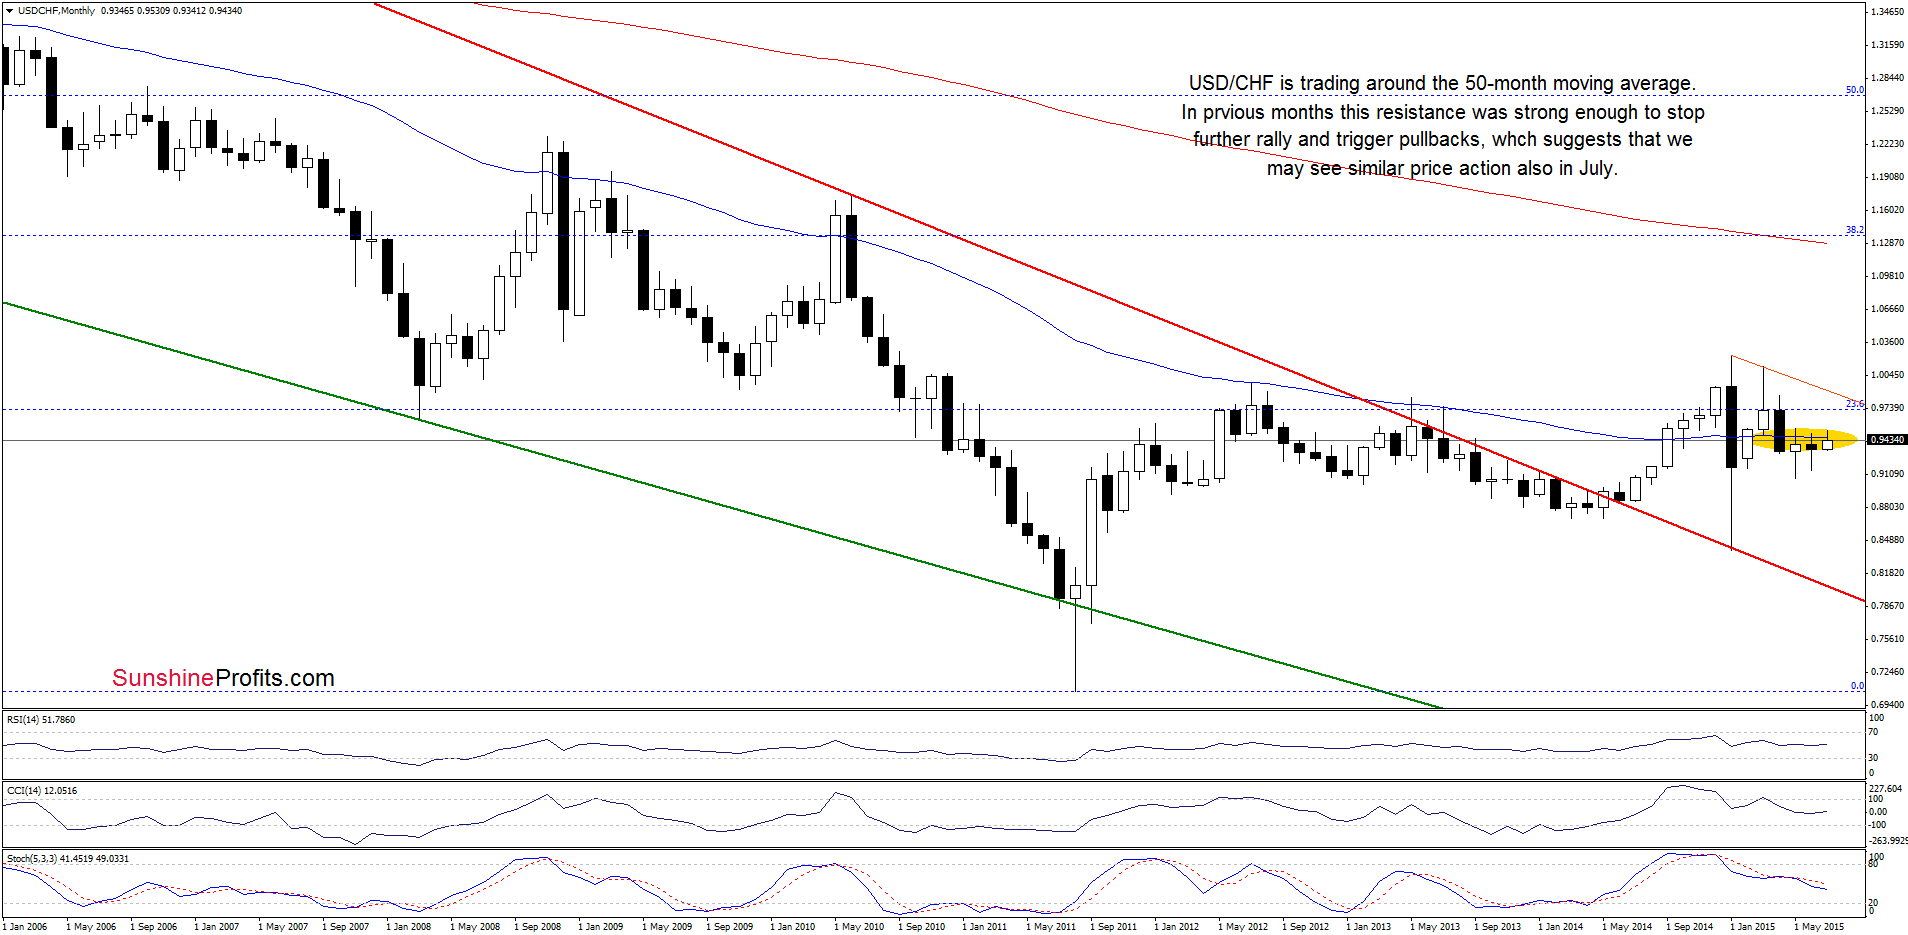 USD/CHF - the monthly chart